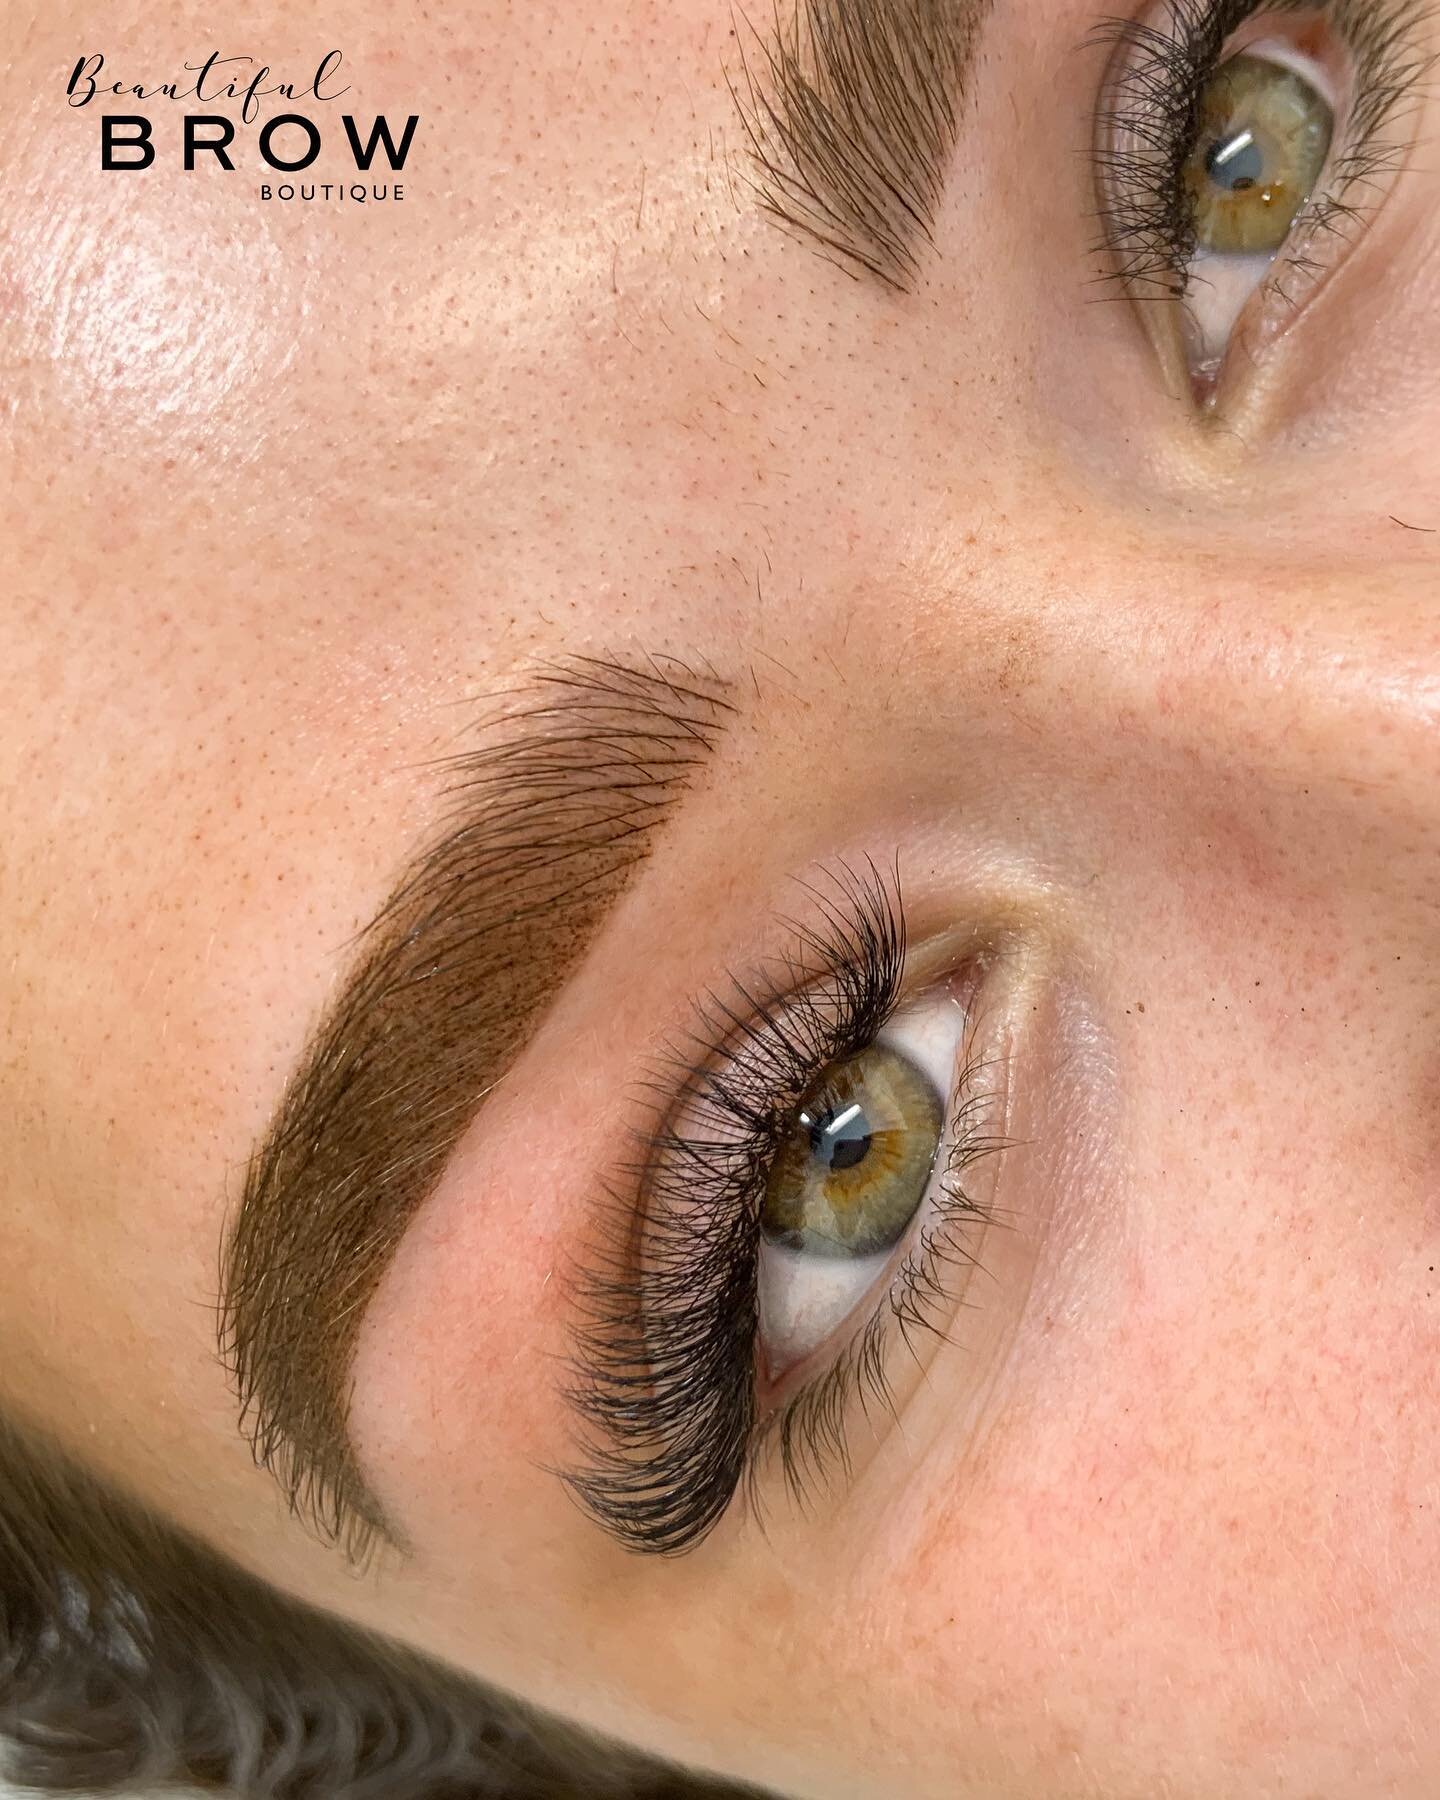 Combo brows don&rsquo;t need to be harsh looking 🙈 if you&rsquo;re worried about sharpie brows ? Well they just don&rsquo;t happen here ! 

Combination brows can be crafted to appear soft, neat, natural .. such a gorgeous enhancement for this babe &